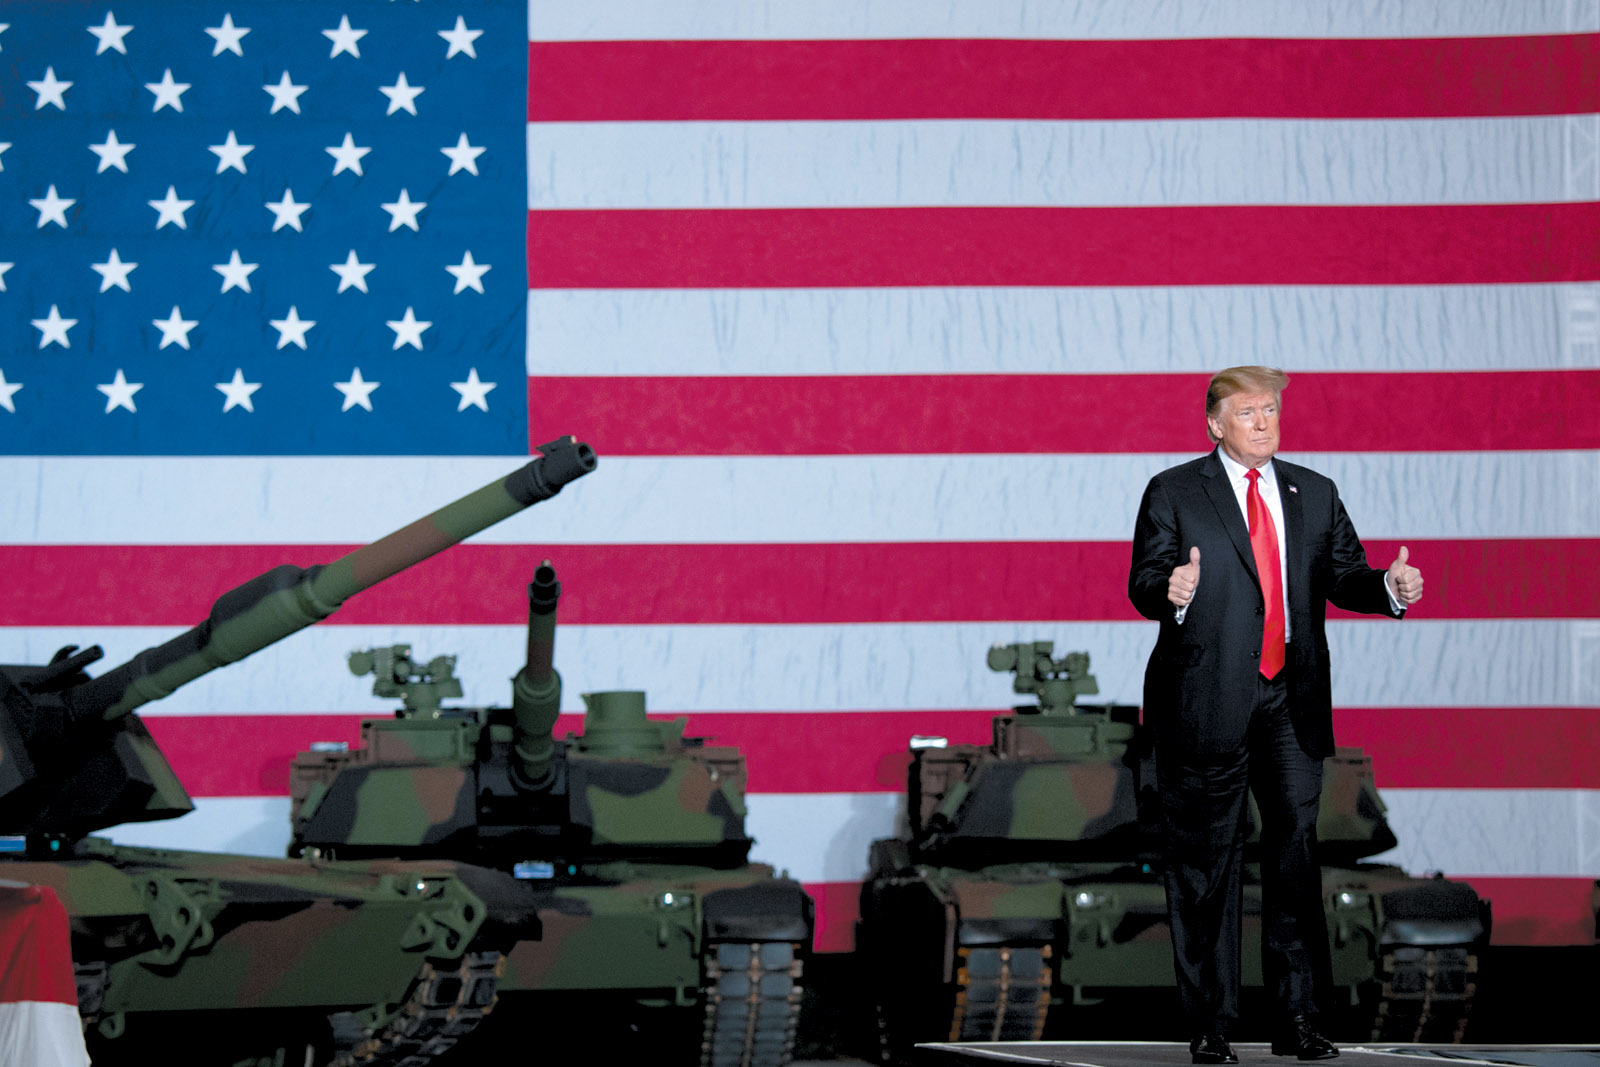 Saul Loeb/AFP/Getty Images President Trump after touring the Lima Army Tank Plant, Lima, Ohio, March 20, 2019